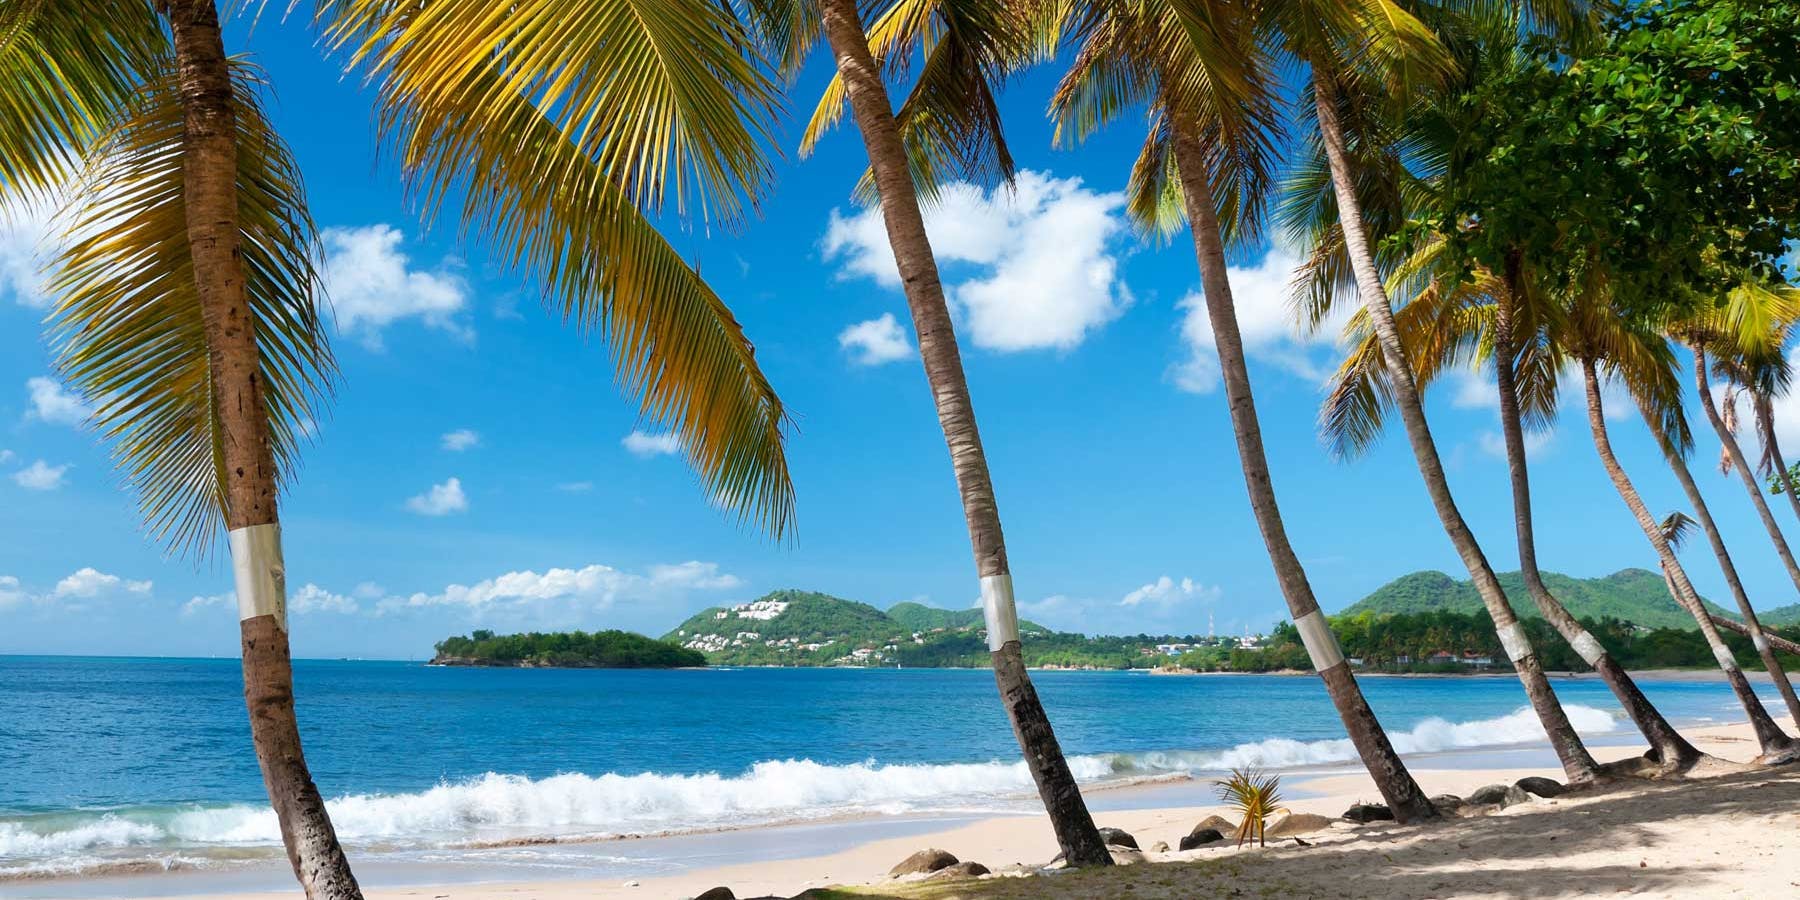 More about St Lucia